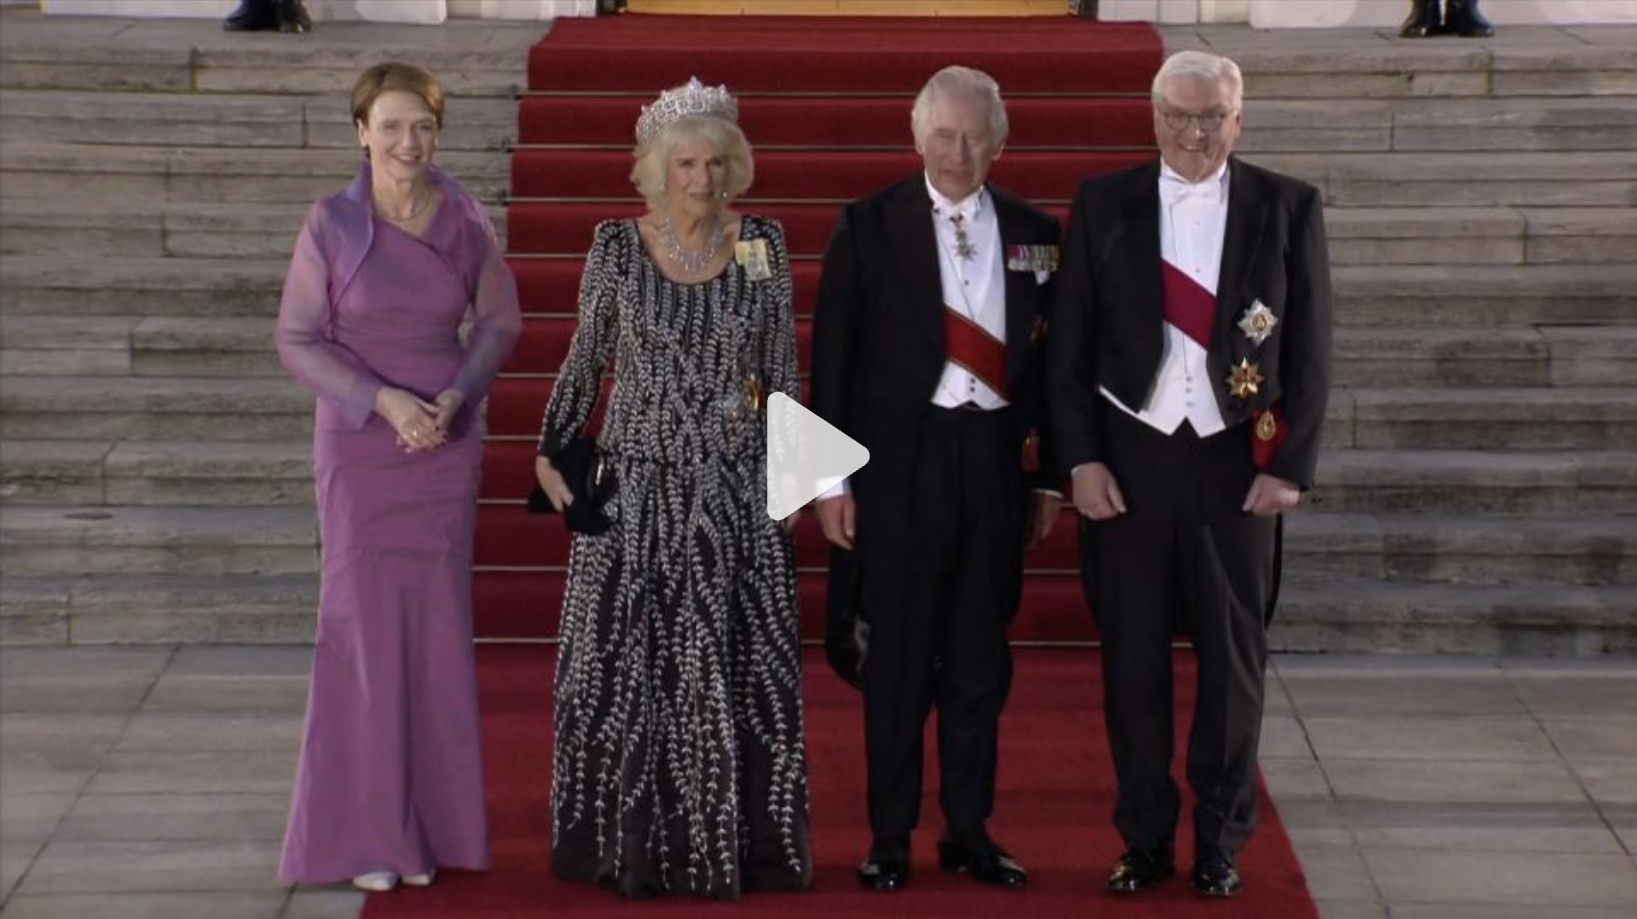 Watch: What Germans think of King Charles III during his visit.